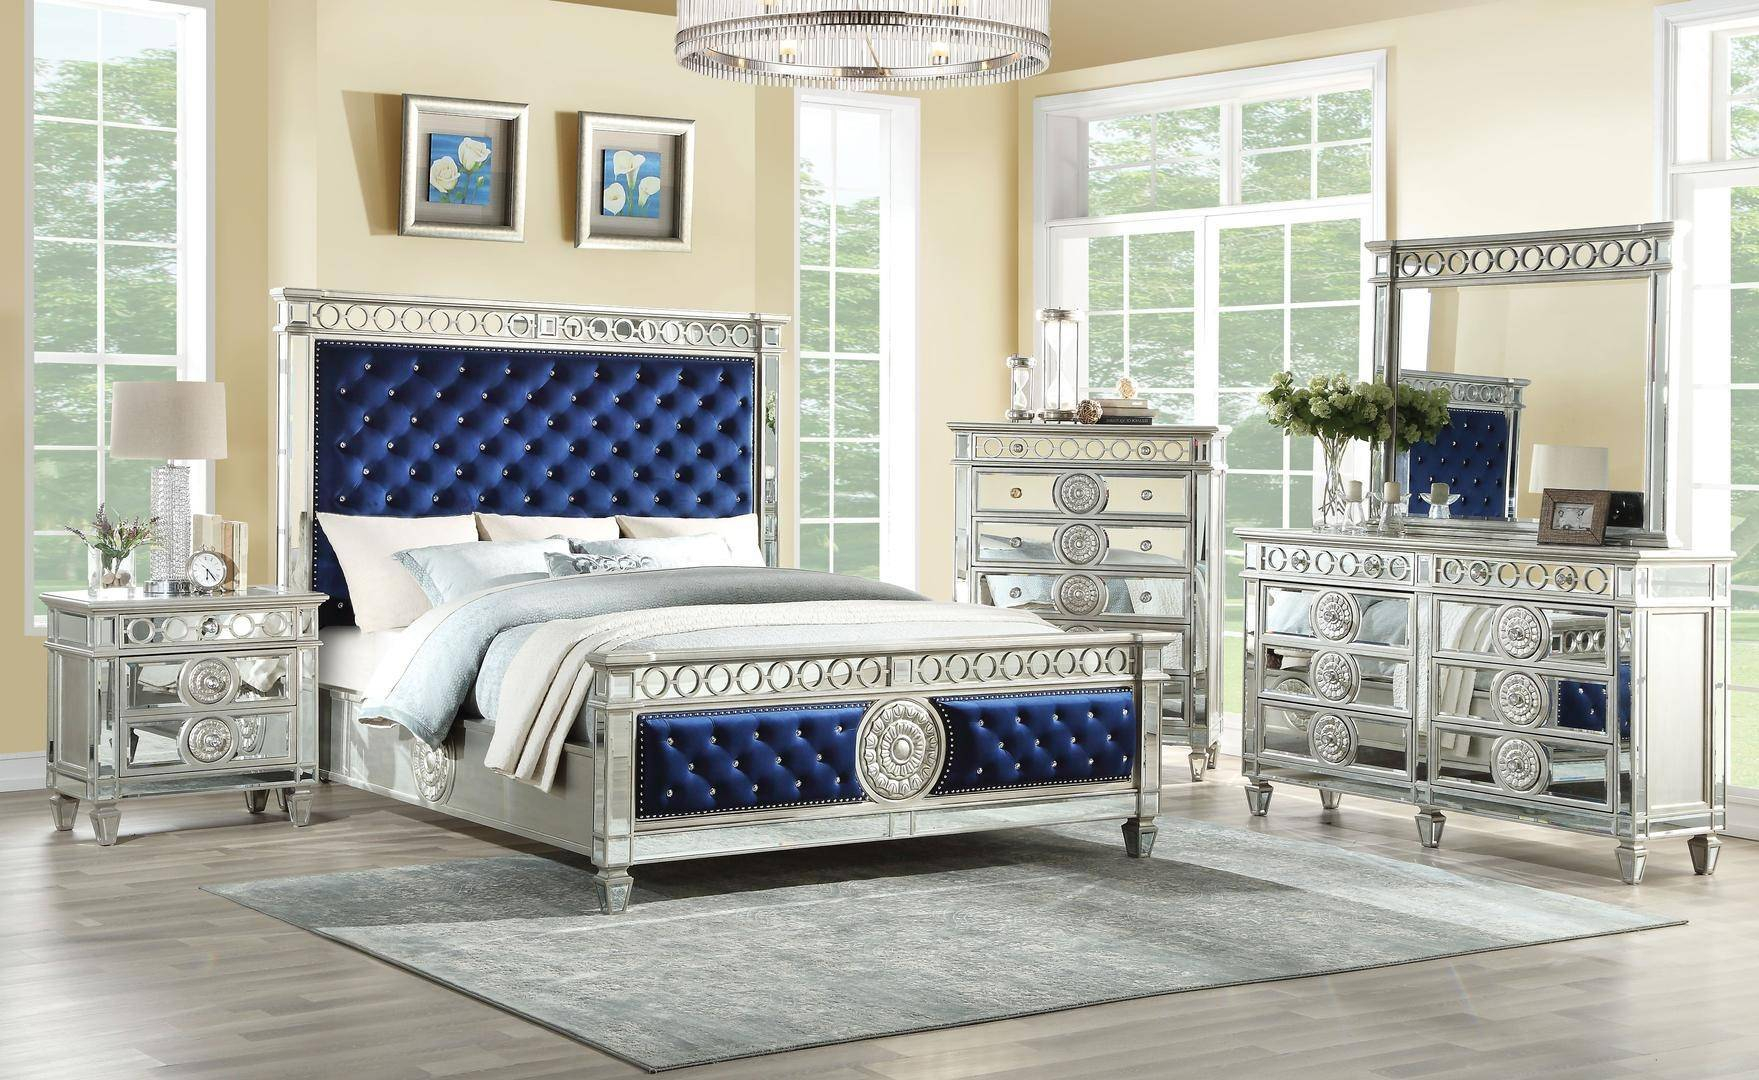 Glam Queen Bedroom Set 3 Blue Tufted Velvet Mirrored Inlay Varian within size 1759 X 1080